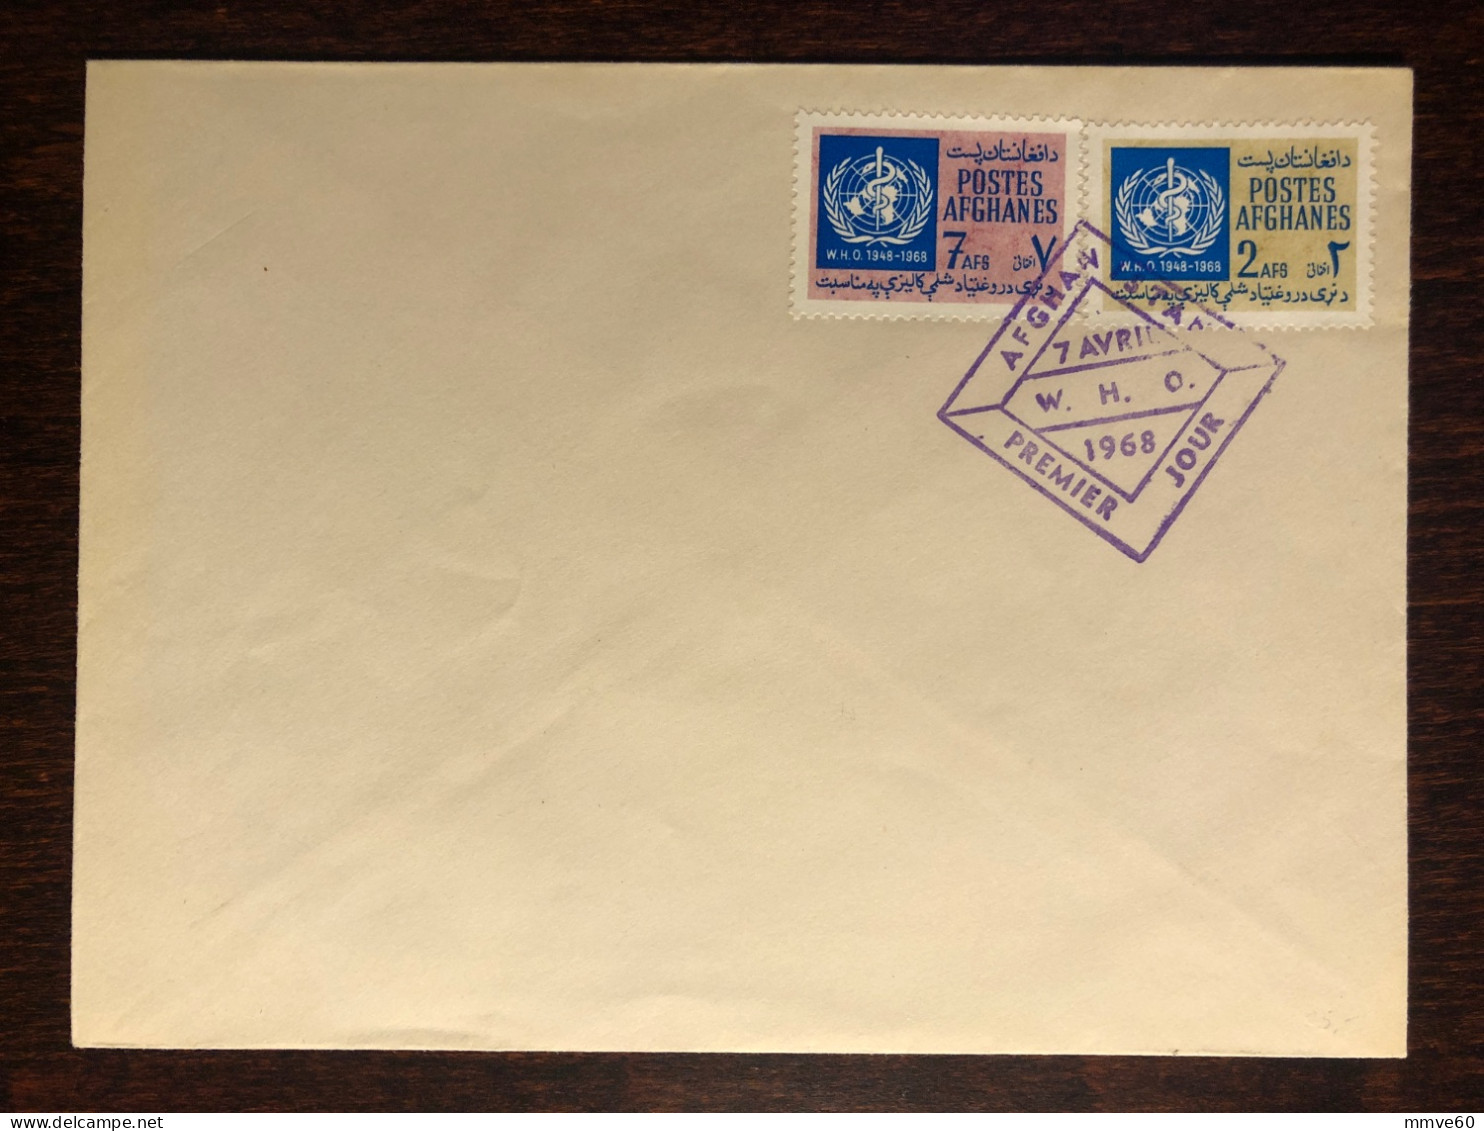 AFGHANISTAN FDC COVER 1968 YEAR WHO HEALTH MEDICINE - Afghanistan